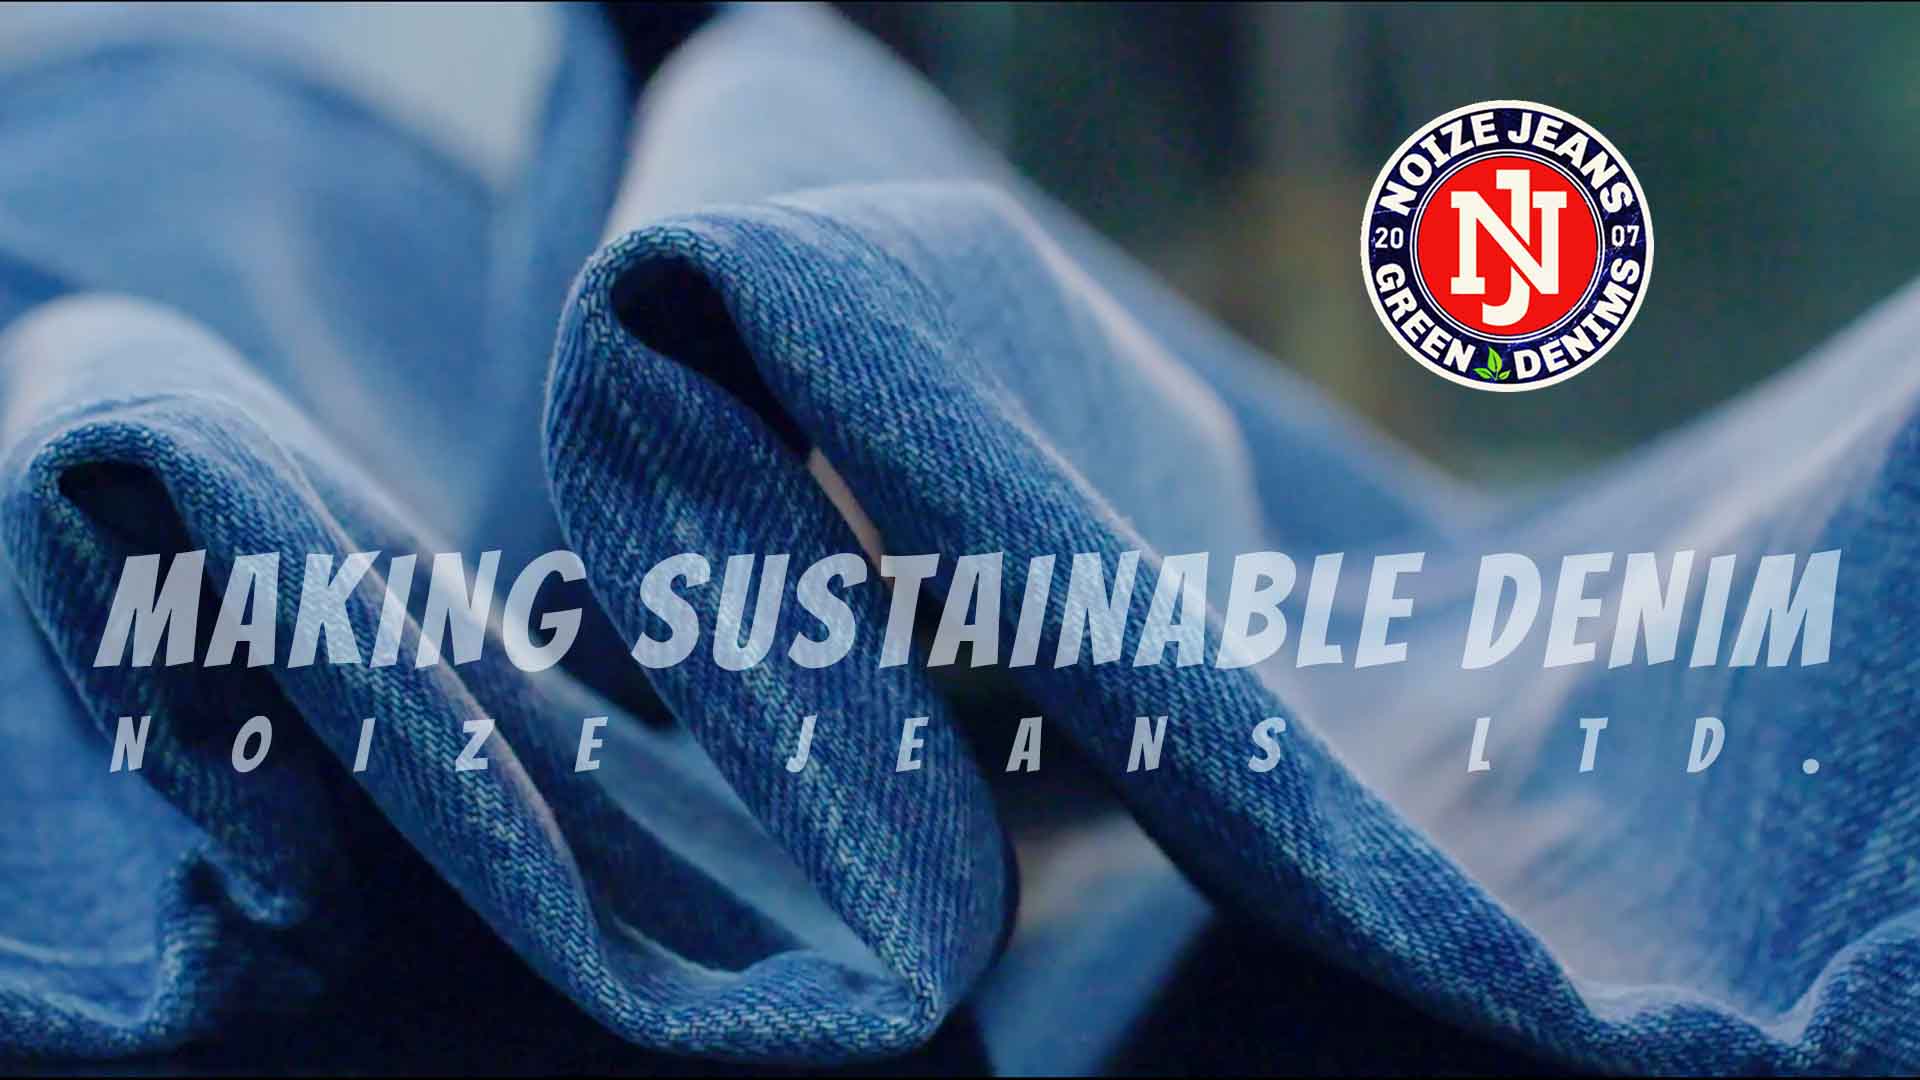 Thumbnail image illustrating sustainable denim production at NOIZE JENS, a visionary in eco-conscious fashion.